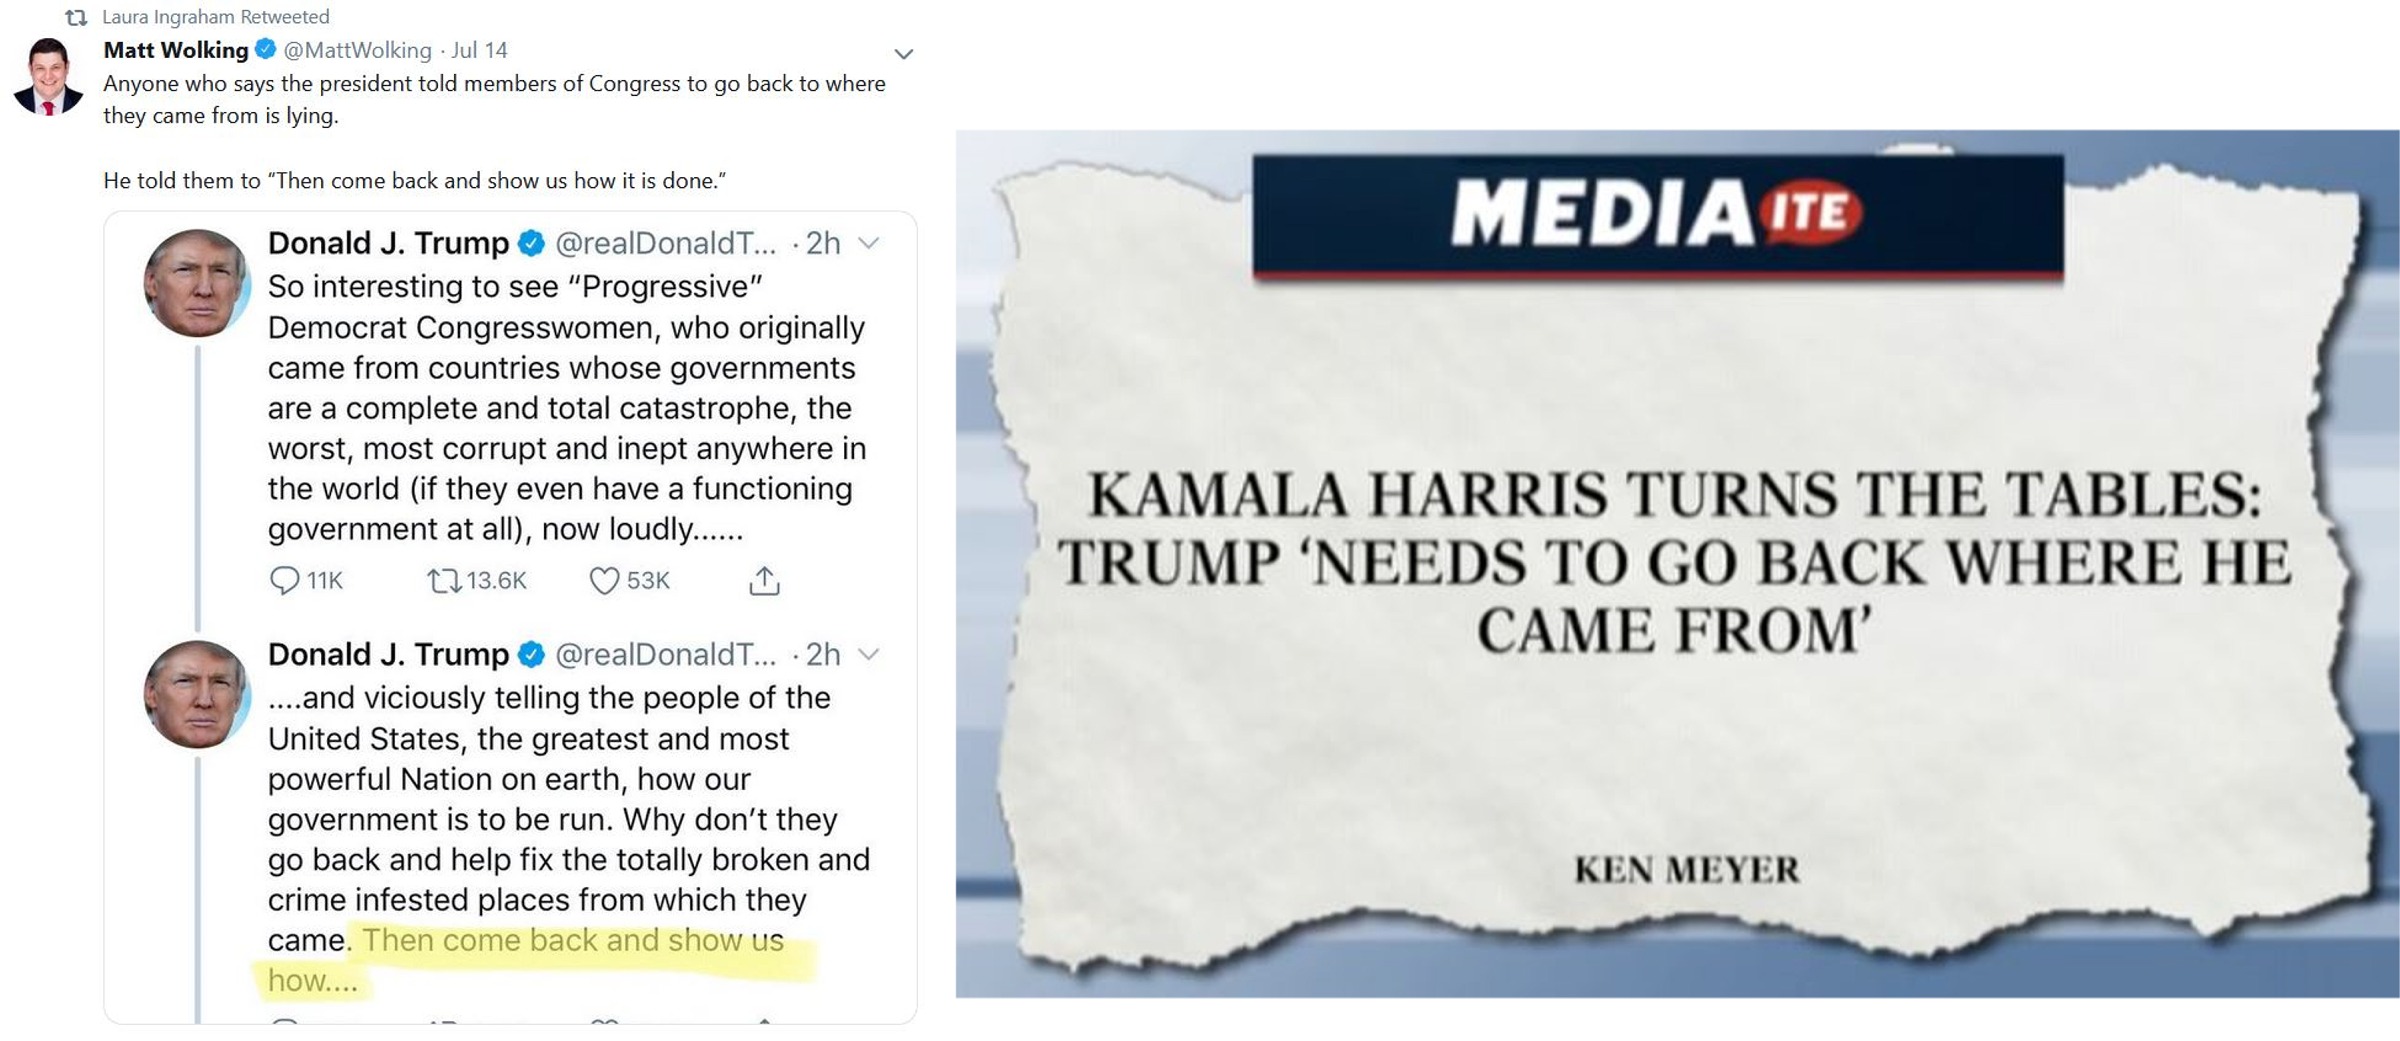 document - t Laura Ingraham Retweeted Matt Wolking Jul 14 Anyone who says the president told members of Congress to go back to where they came from is lying. He told them to "Then come back and show us how it is done." Media Ite Donald J. Trump ... 2h So 